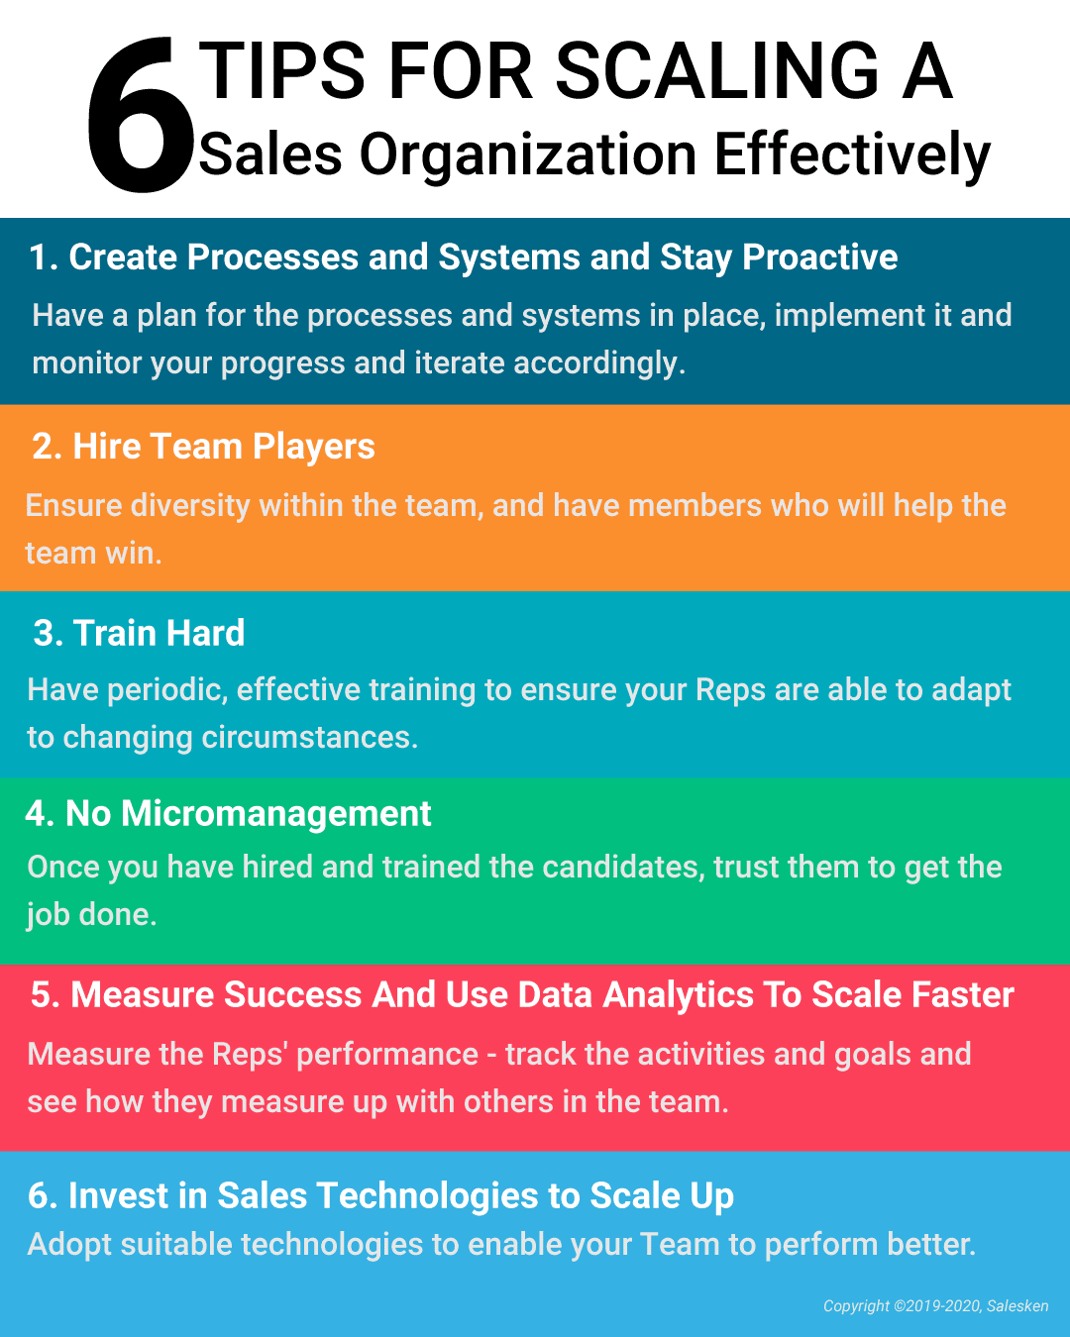 tips-to-scale-a-sales-organization-infographic